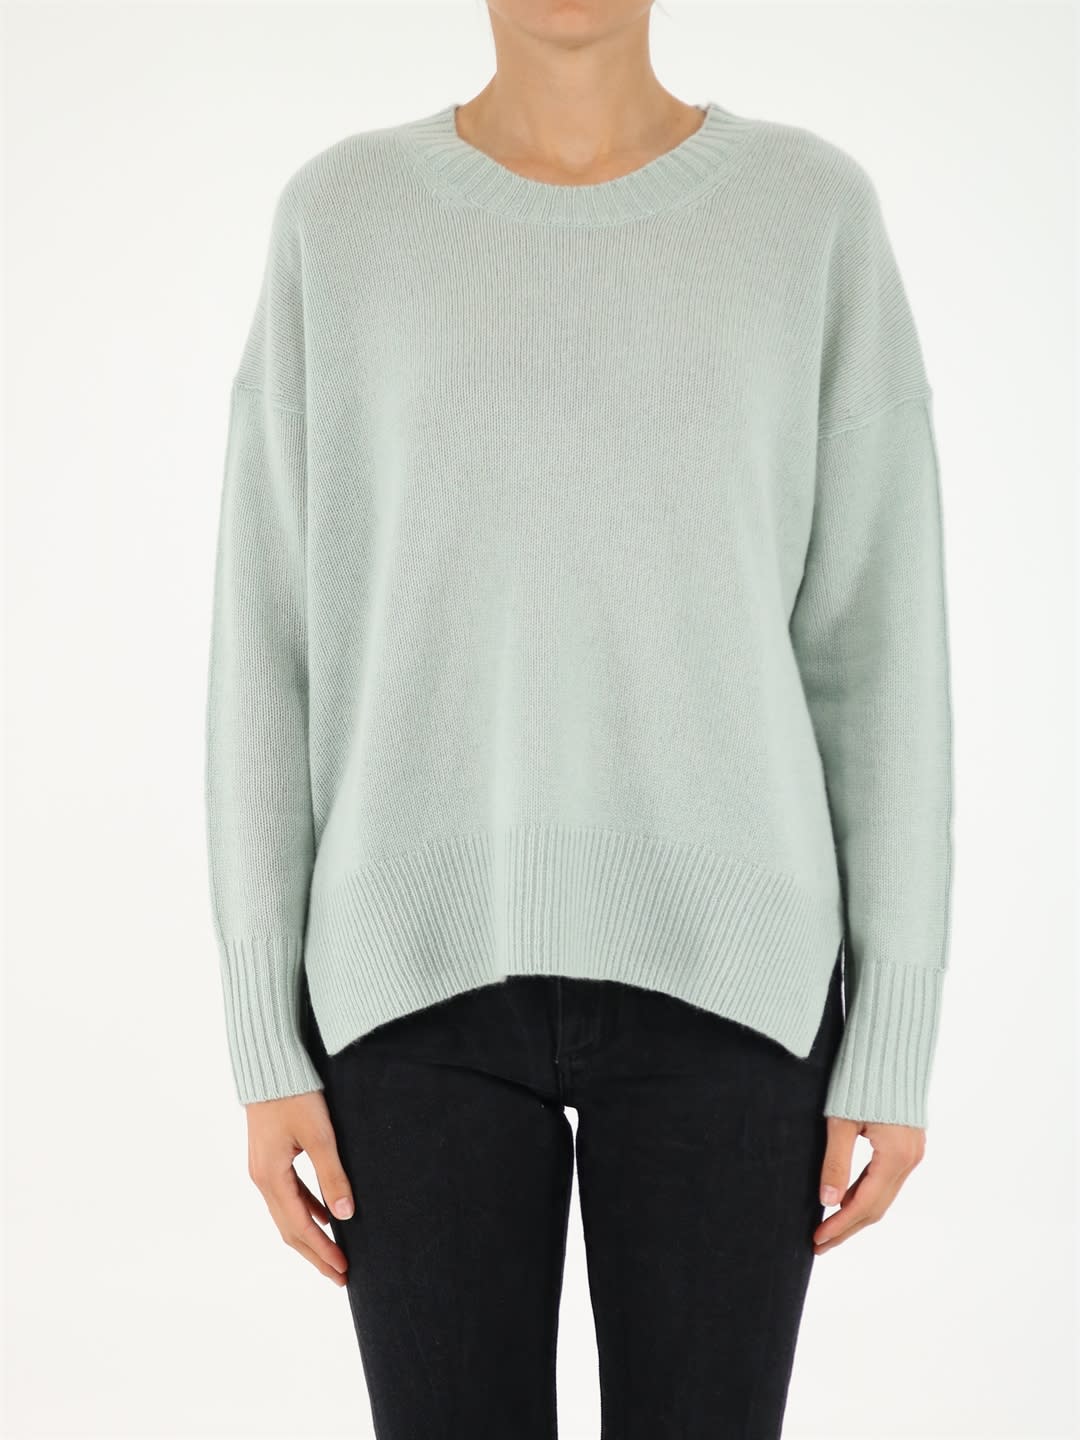 Allude Oversized Pastel Green Sweater